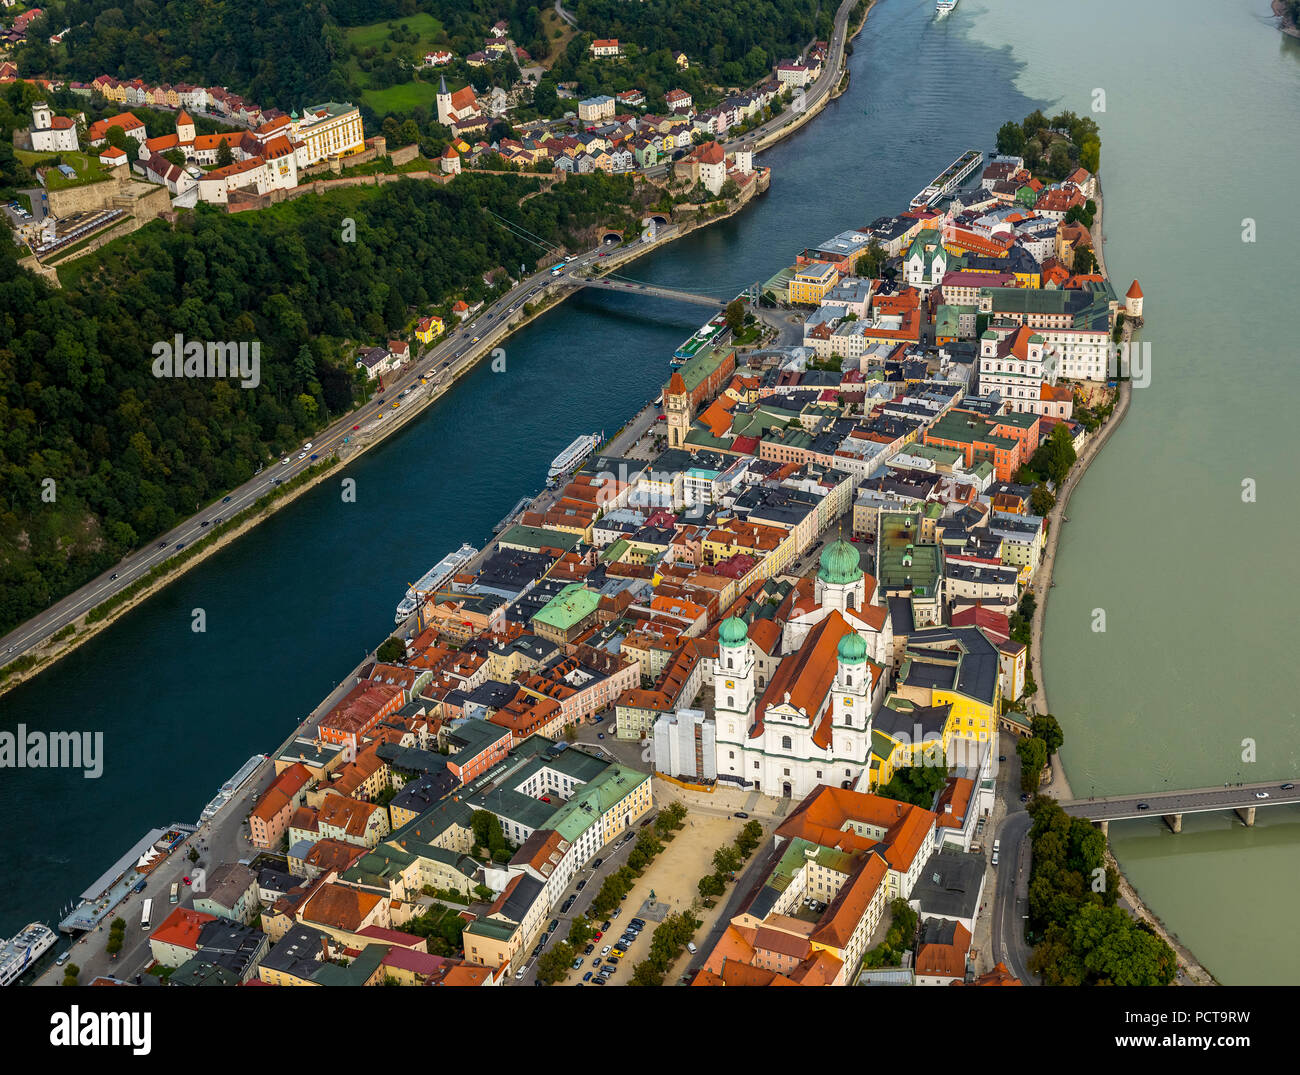 Aerial photo, old town of Passau with Saint Stephen's Cathedral on Cathedral Square, seat of the Bishop of Passau, confluence of Danube, Inn and Ilz Rivers, Passau, independent university town in the administrative district of Lower Bavaria in Eastern Bavaria, Bavaria, Germany Stock Photo